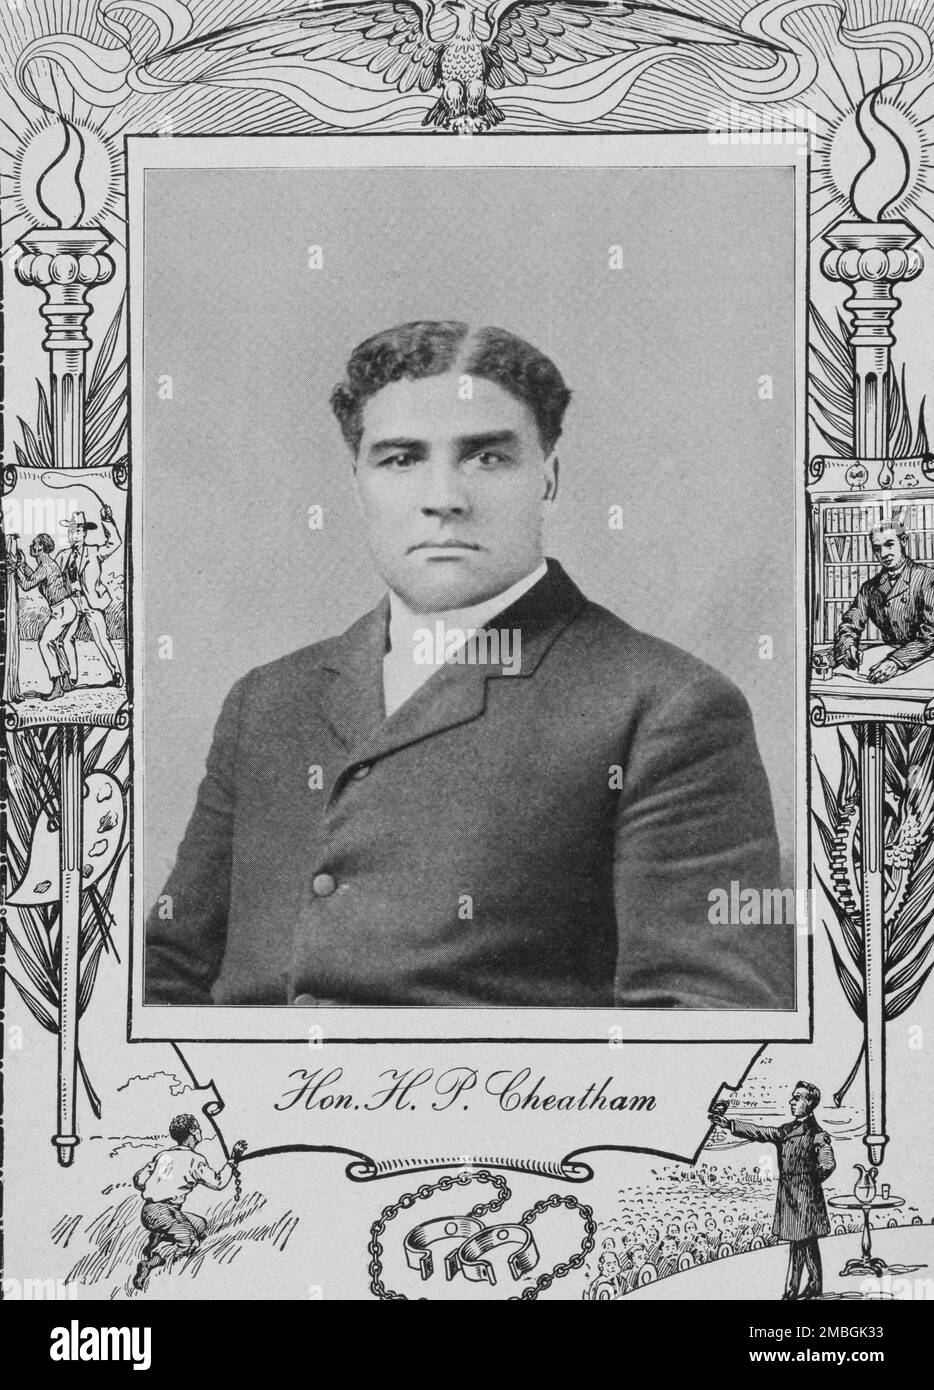 Hon. H. P. Cheatham [recto], 1902. African-American businessman, inventor, educator, farmer and politician. One of only five black Americans elected to Congress from the South in the Jim Crow era of the last decade of the nineteenth century. From a 'cyclopedia of thought on the vital topics relating to' black Americans. Stock Photo